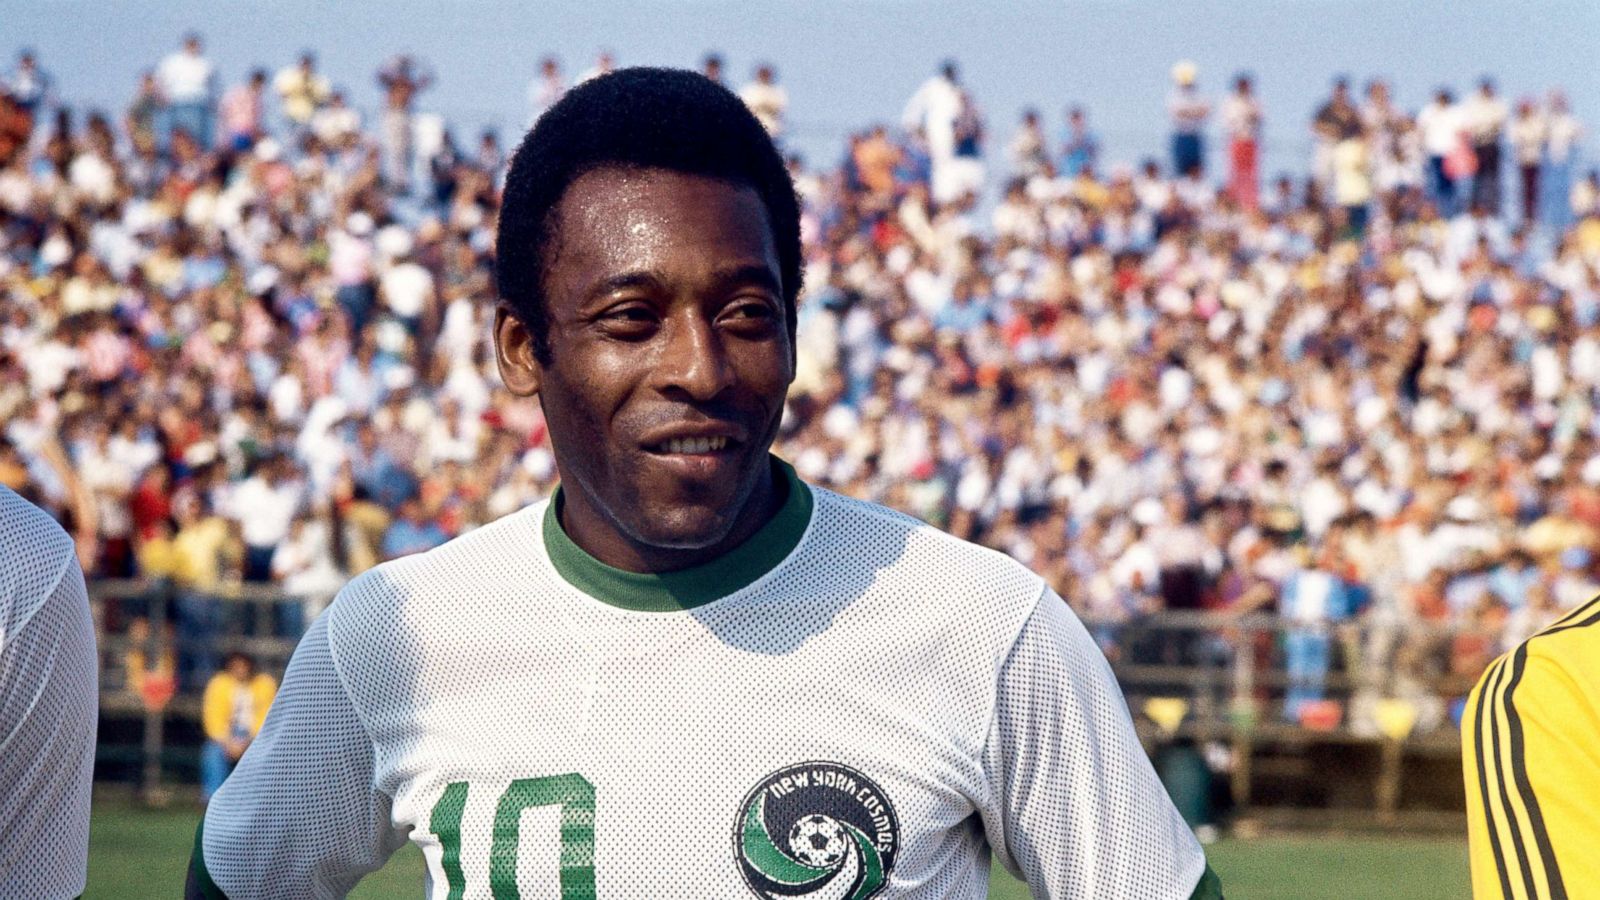 A Legend on the Field: The Life of Football Star Pele